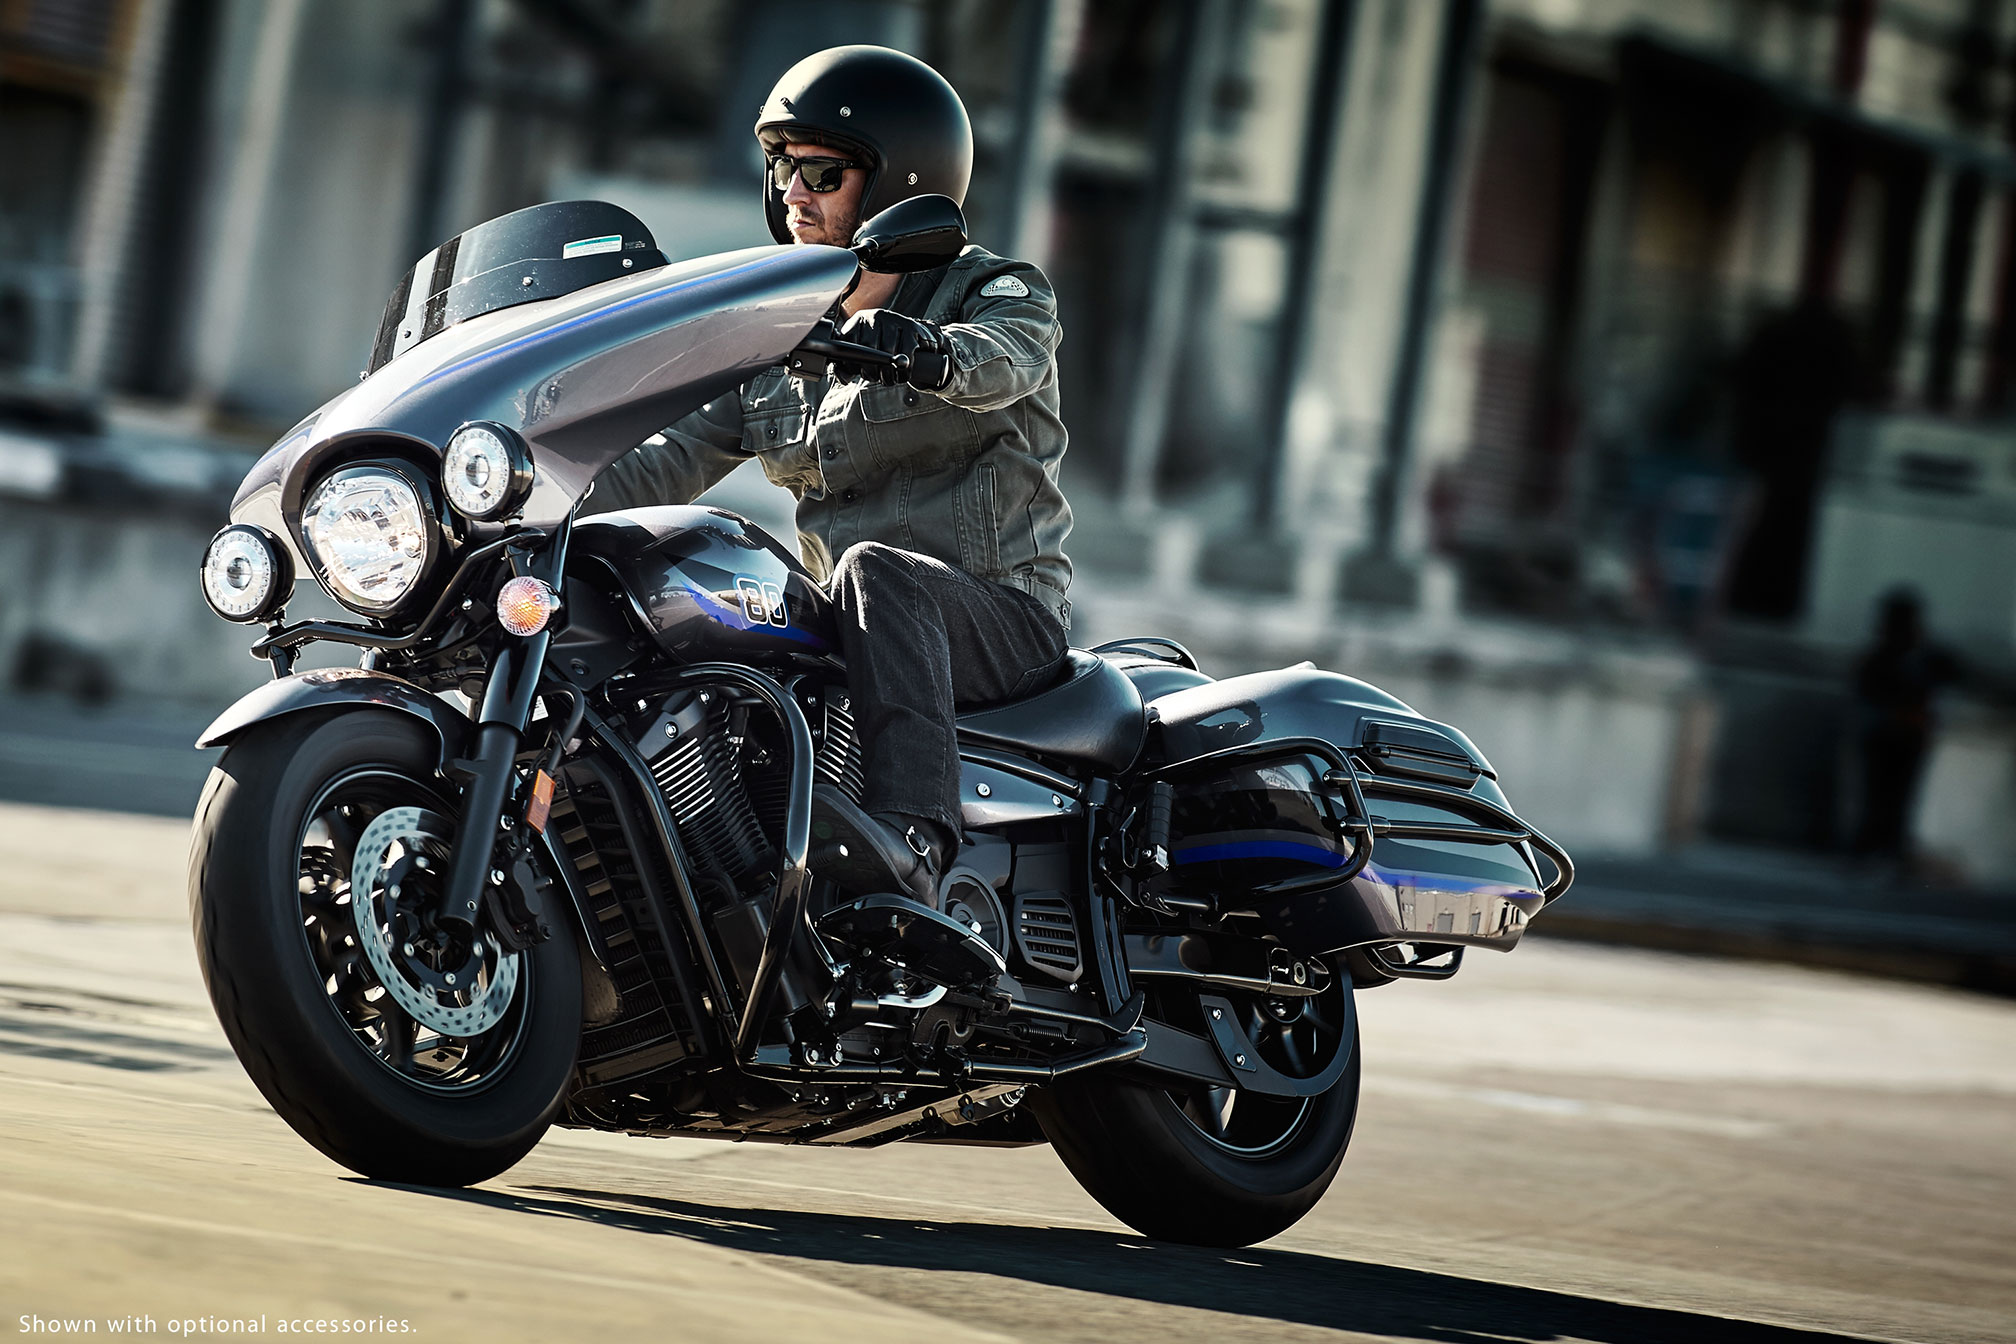 2016 Yamaha V Star 1300 Deluxe Review